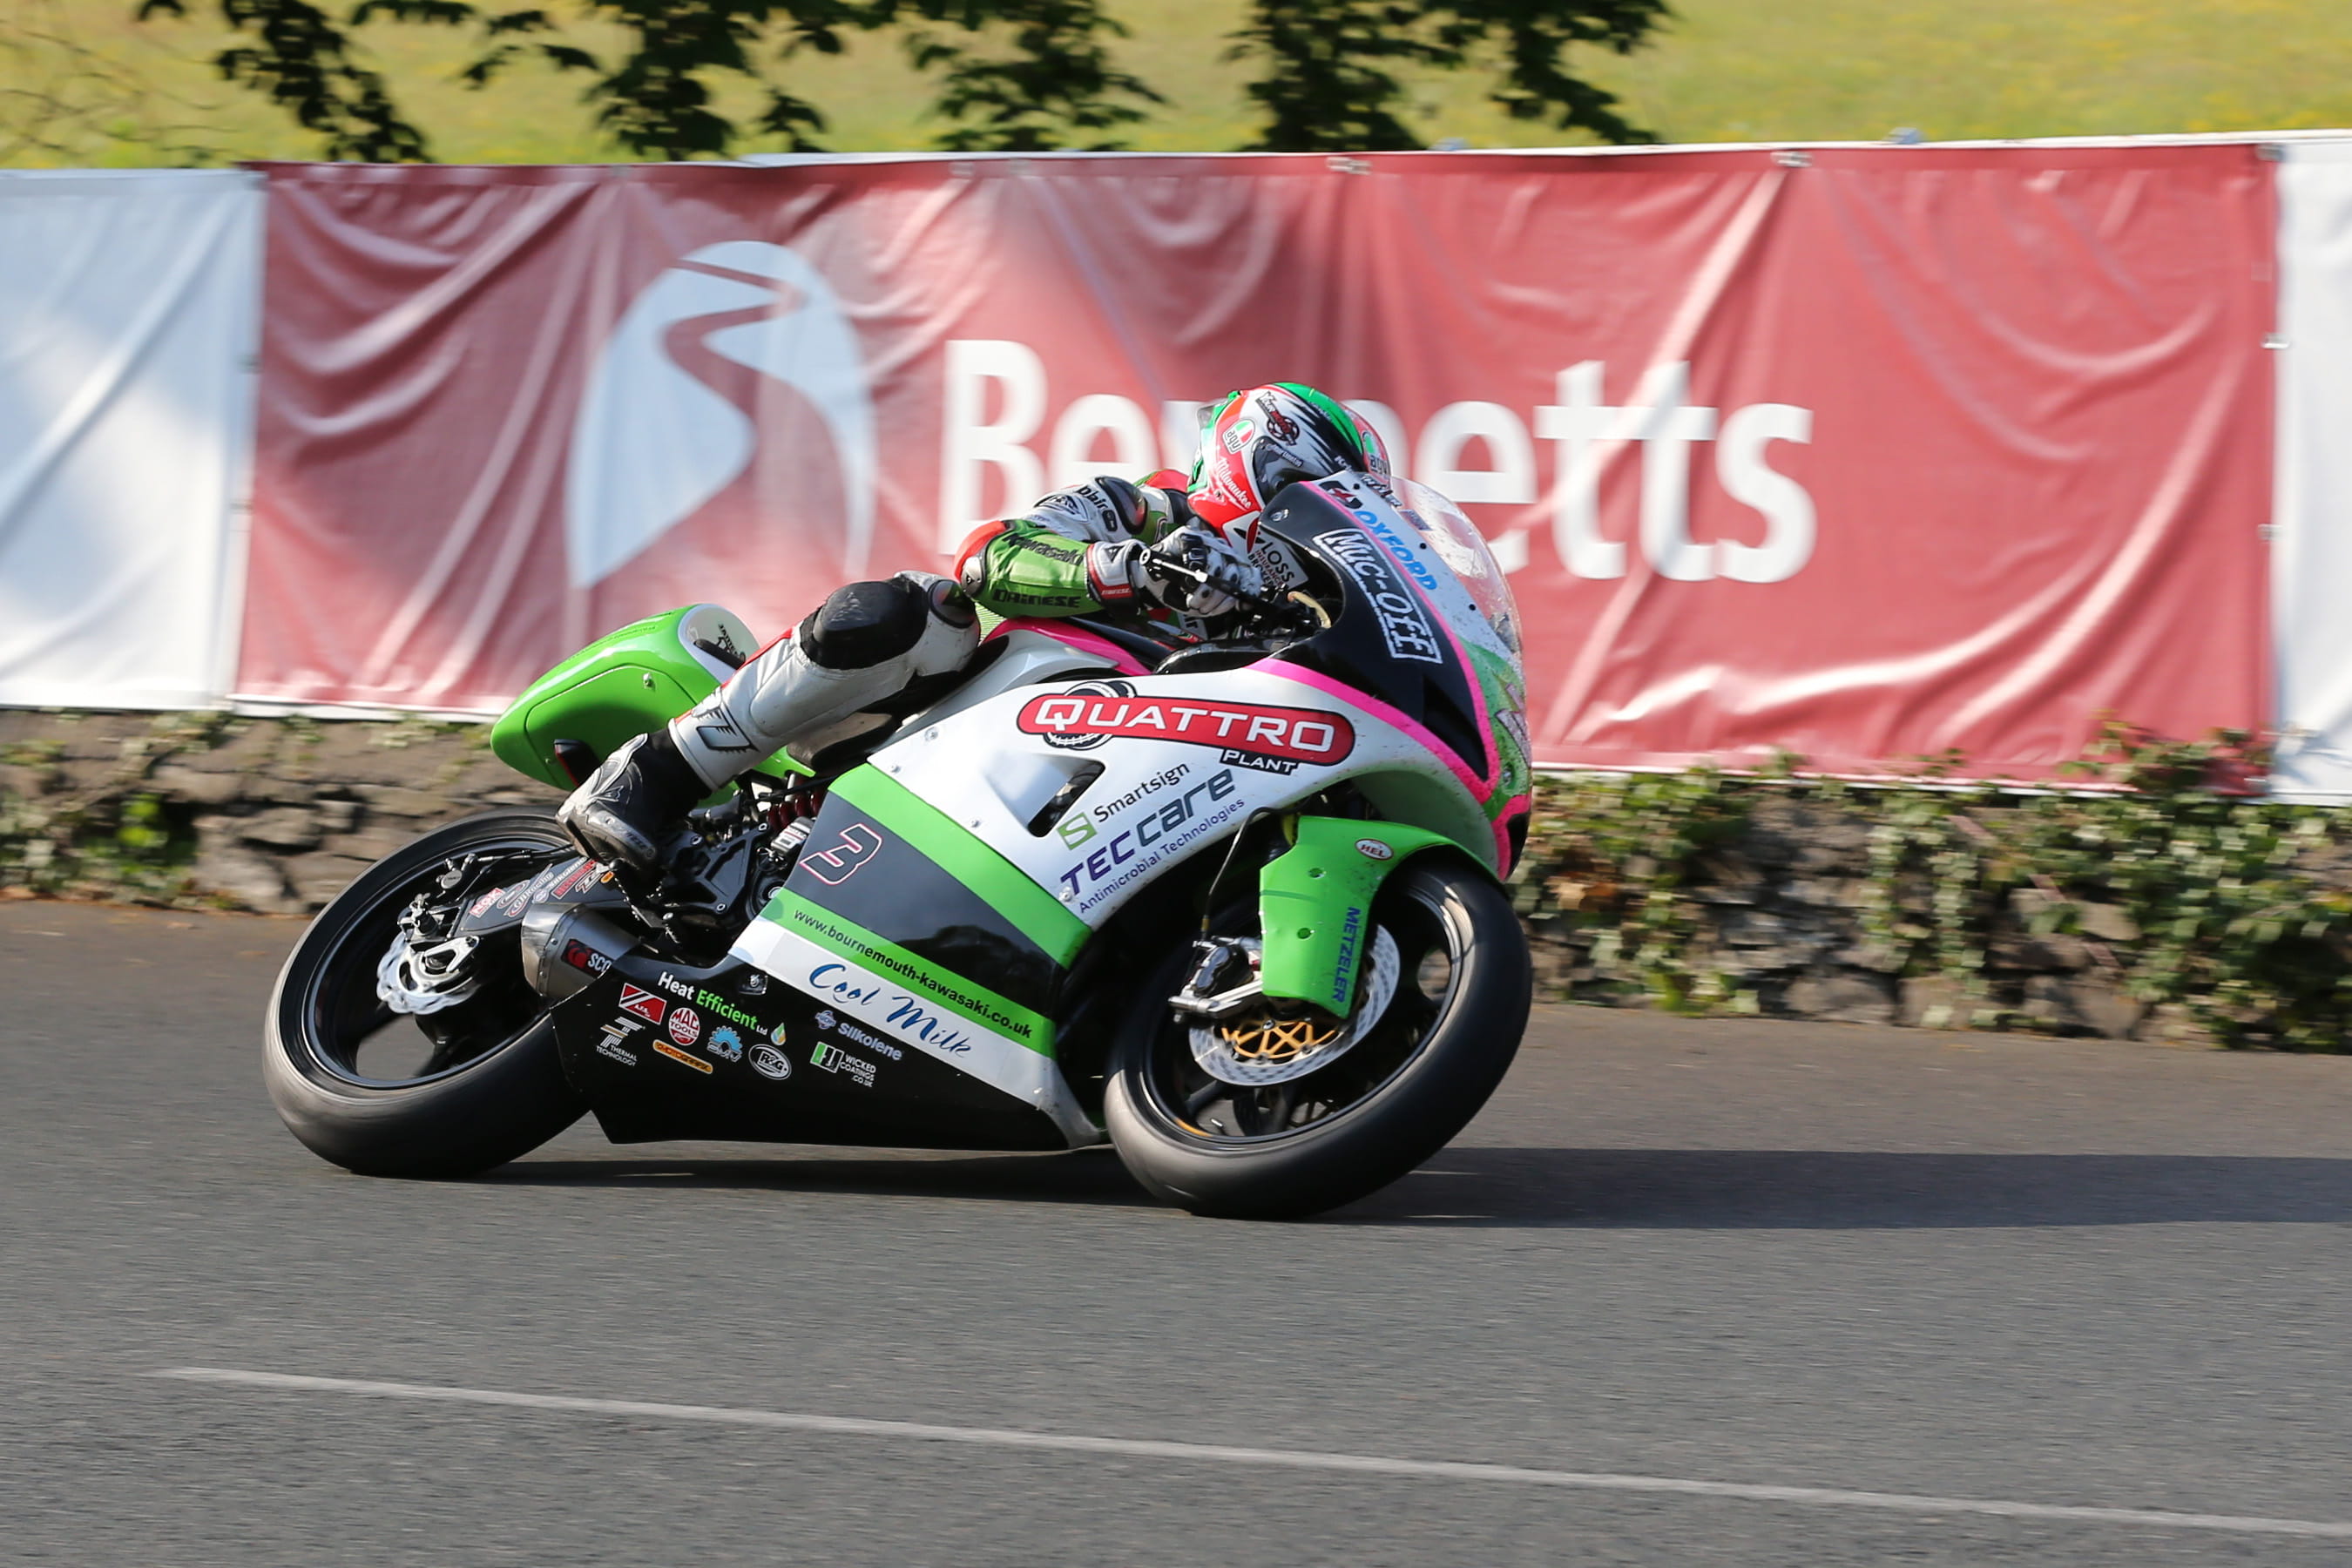 Hillier led early on